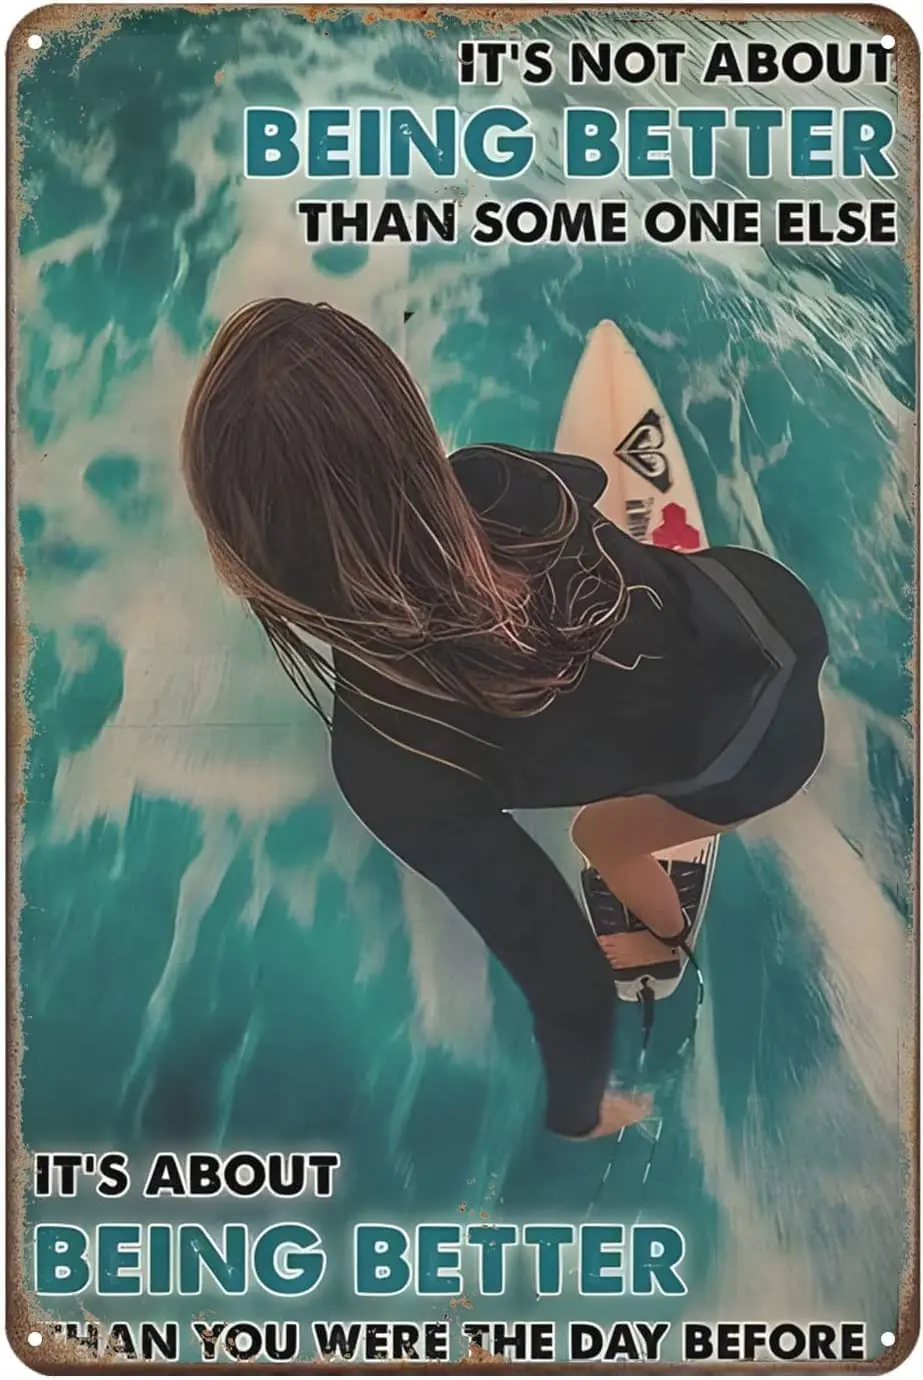 

Vintage Wave Surfer Tin Sign It'S Not About Being Better Than Someone Else Metal Poster Retro Plaque Wall Decor Gift For